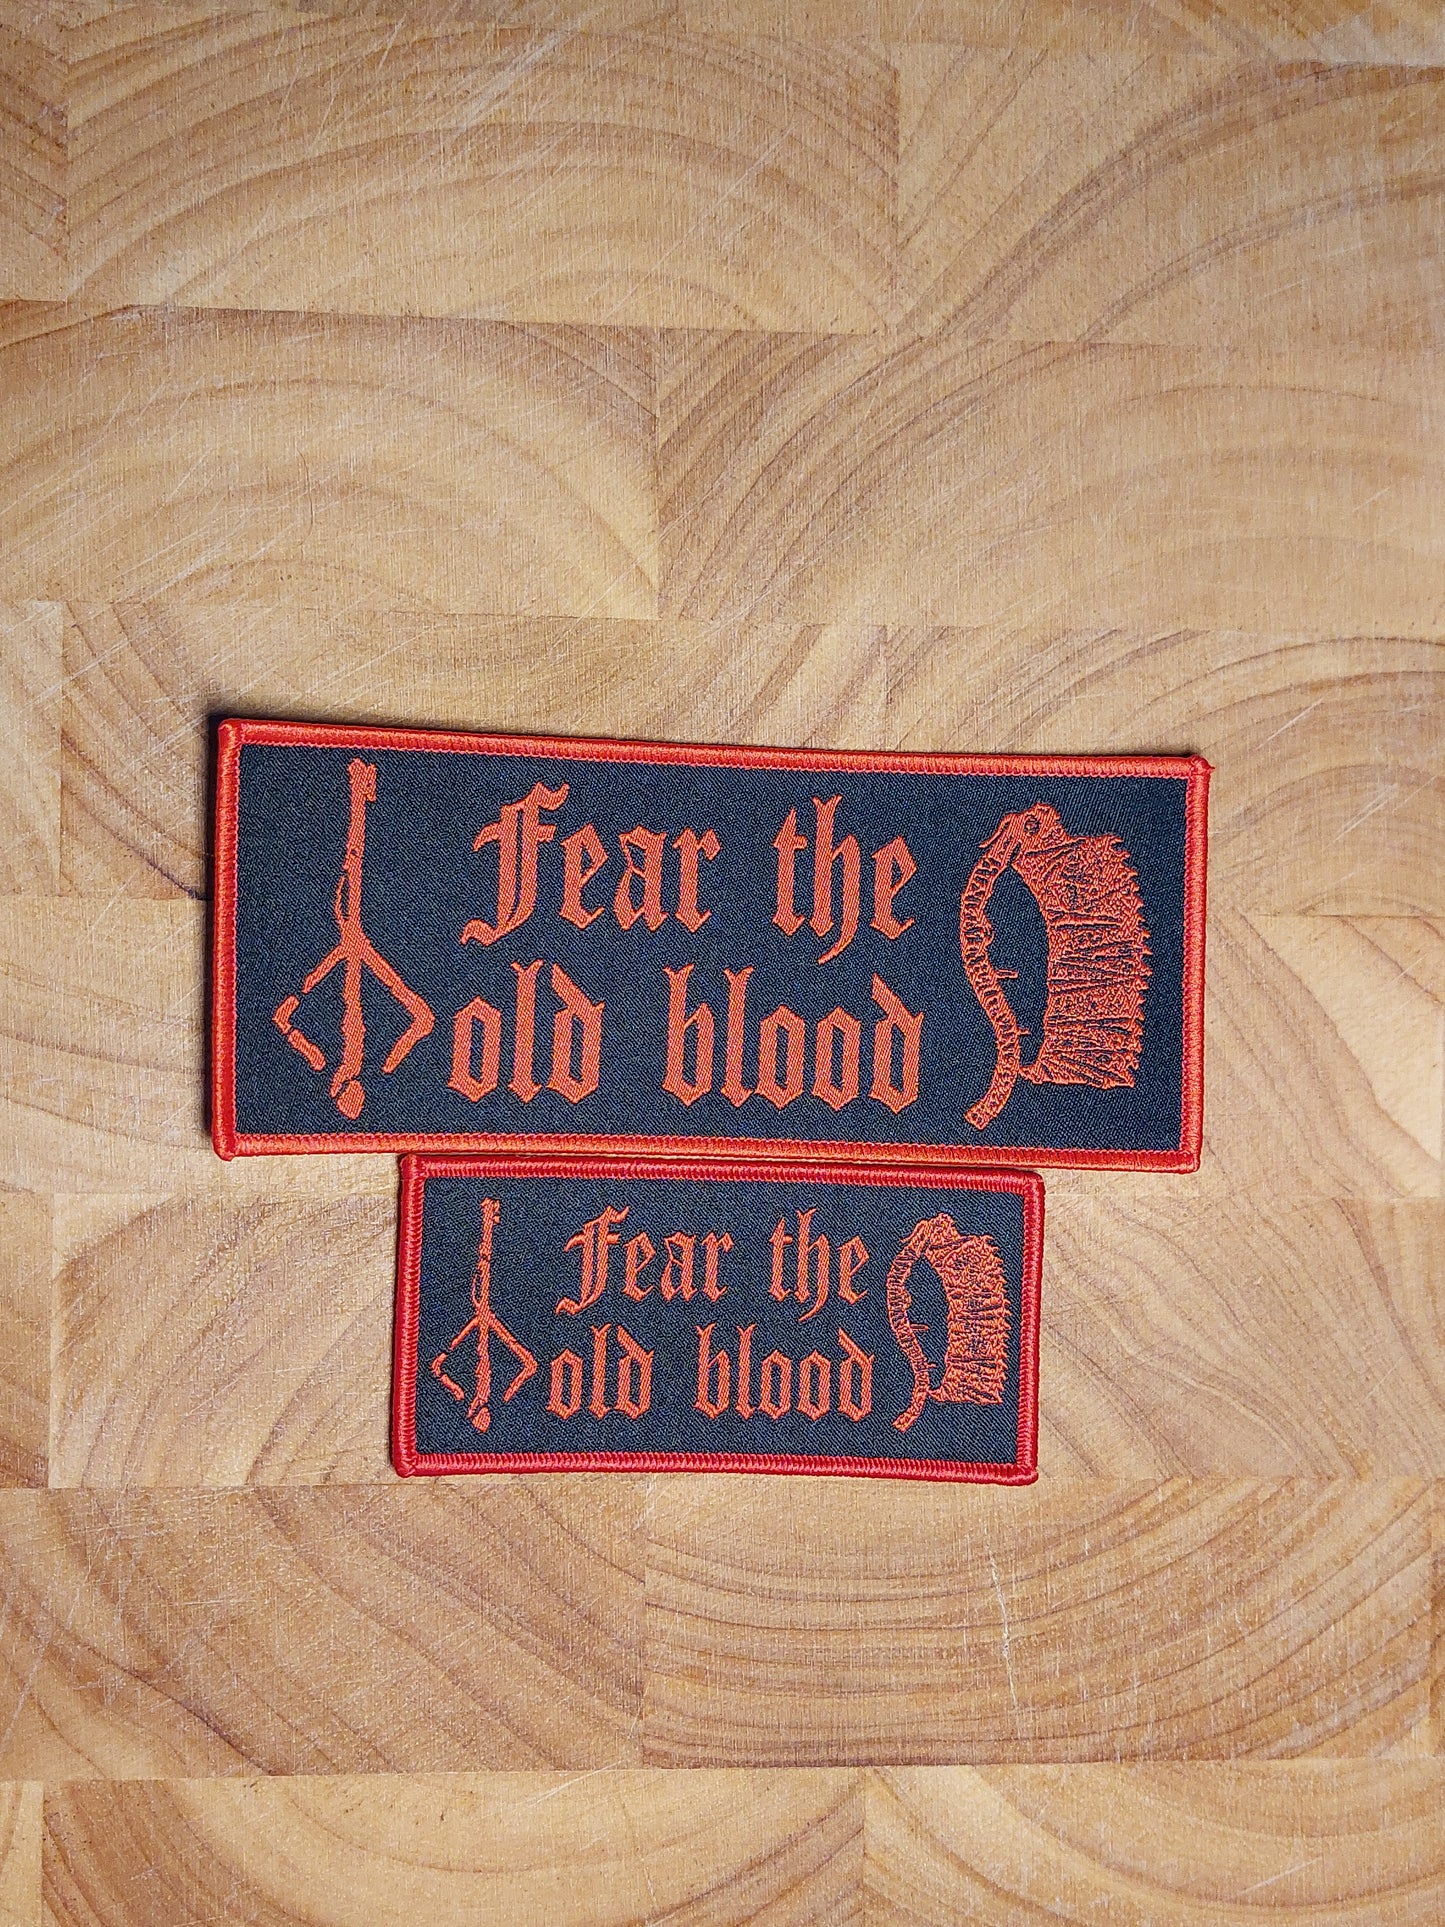 Bloodborne - Fear the old blood